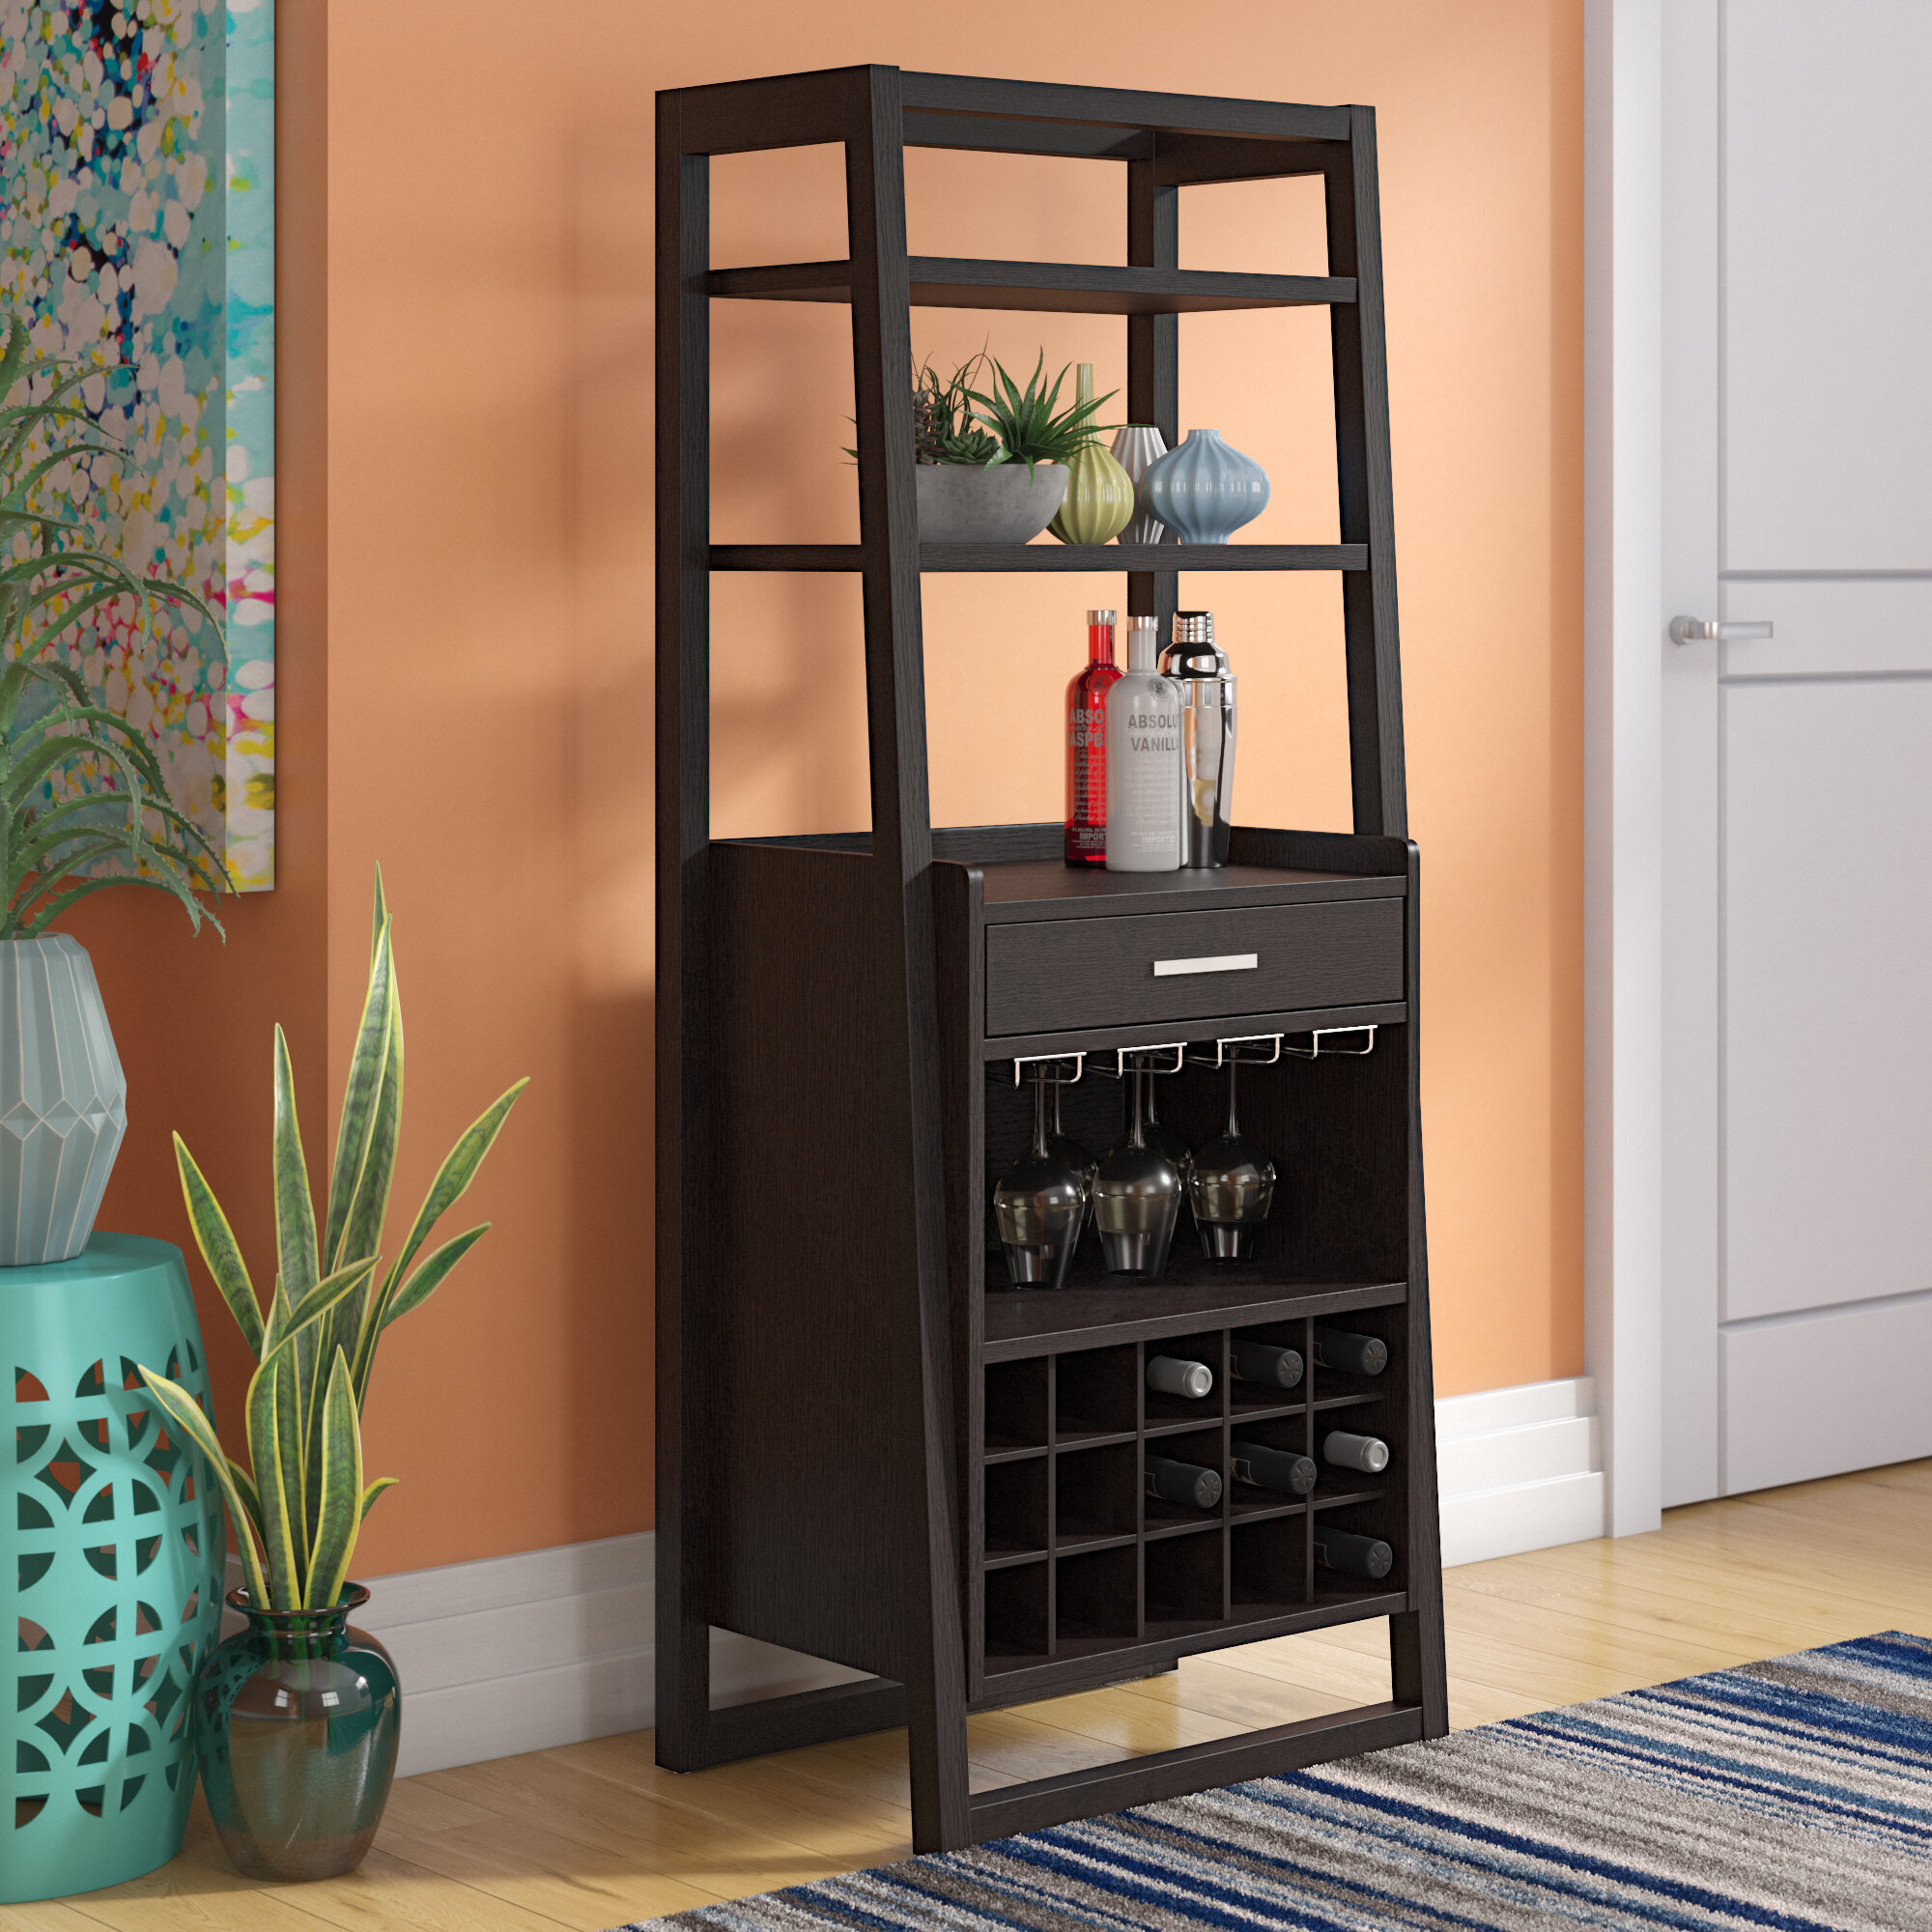 Wine Racks America - Here's a great example of clean, simple, modern wine  racking. Le Rustique by VintageView Wine Storage Systems. At under $40  how can you go wrong?